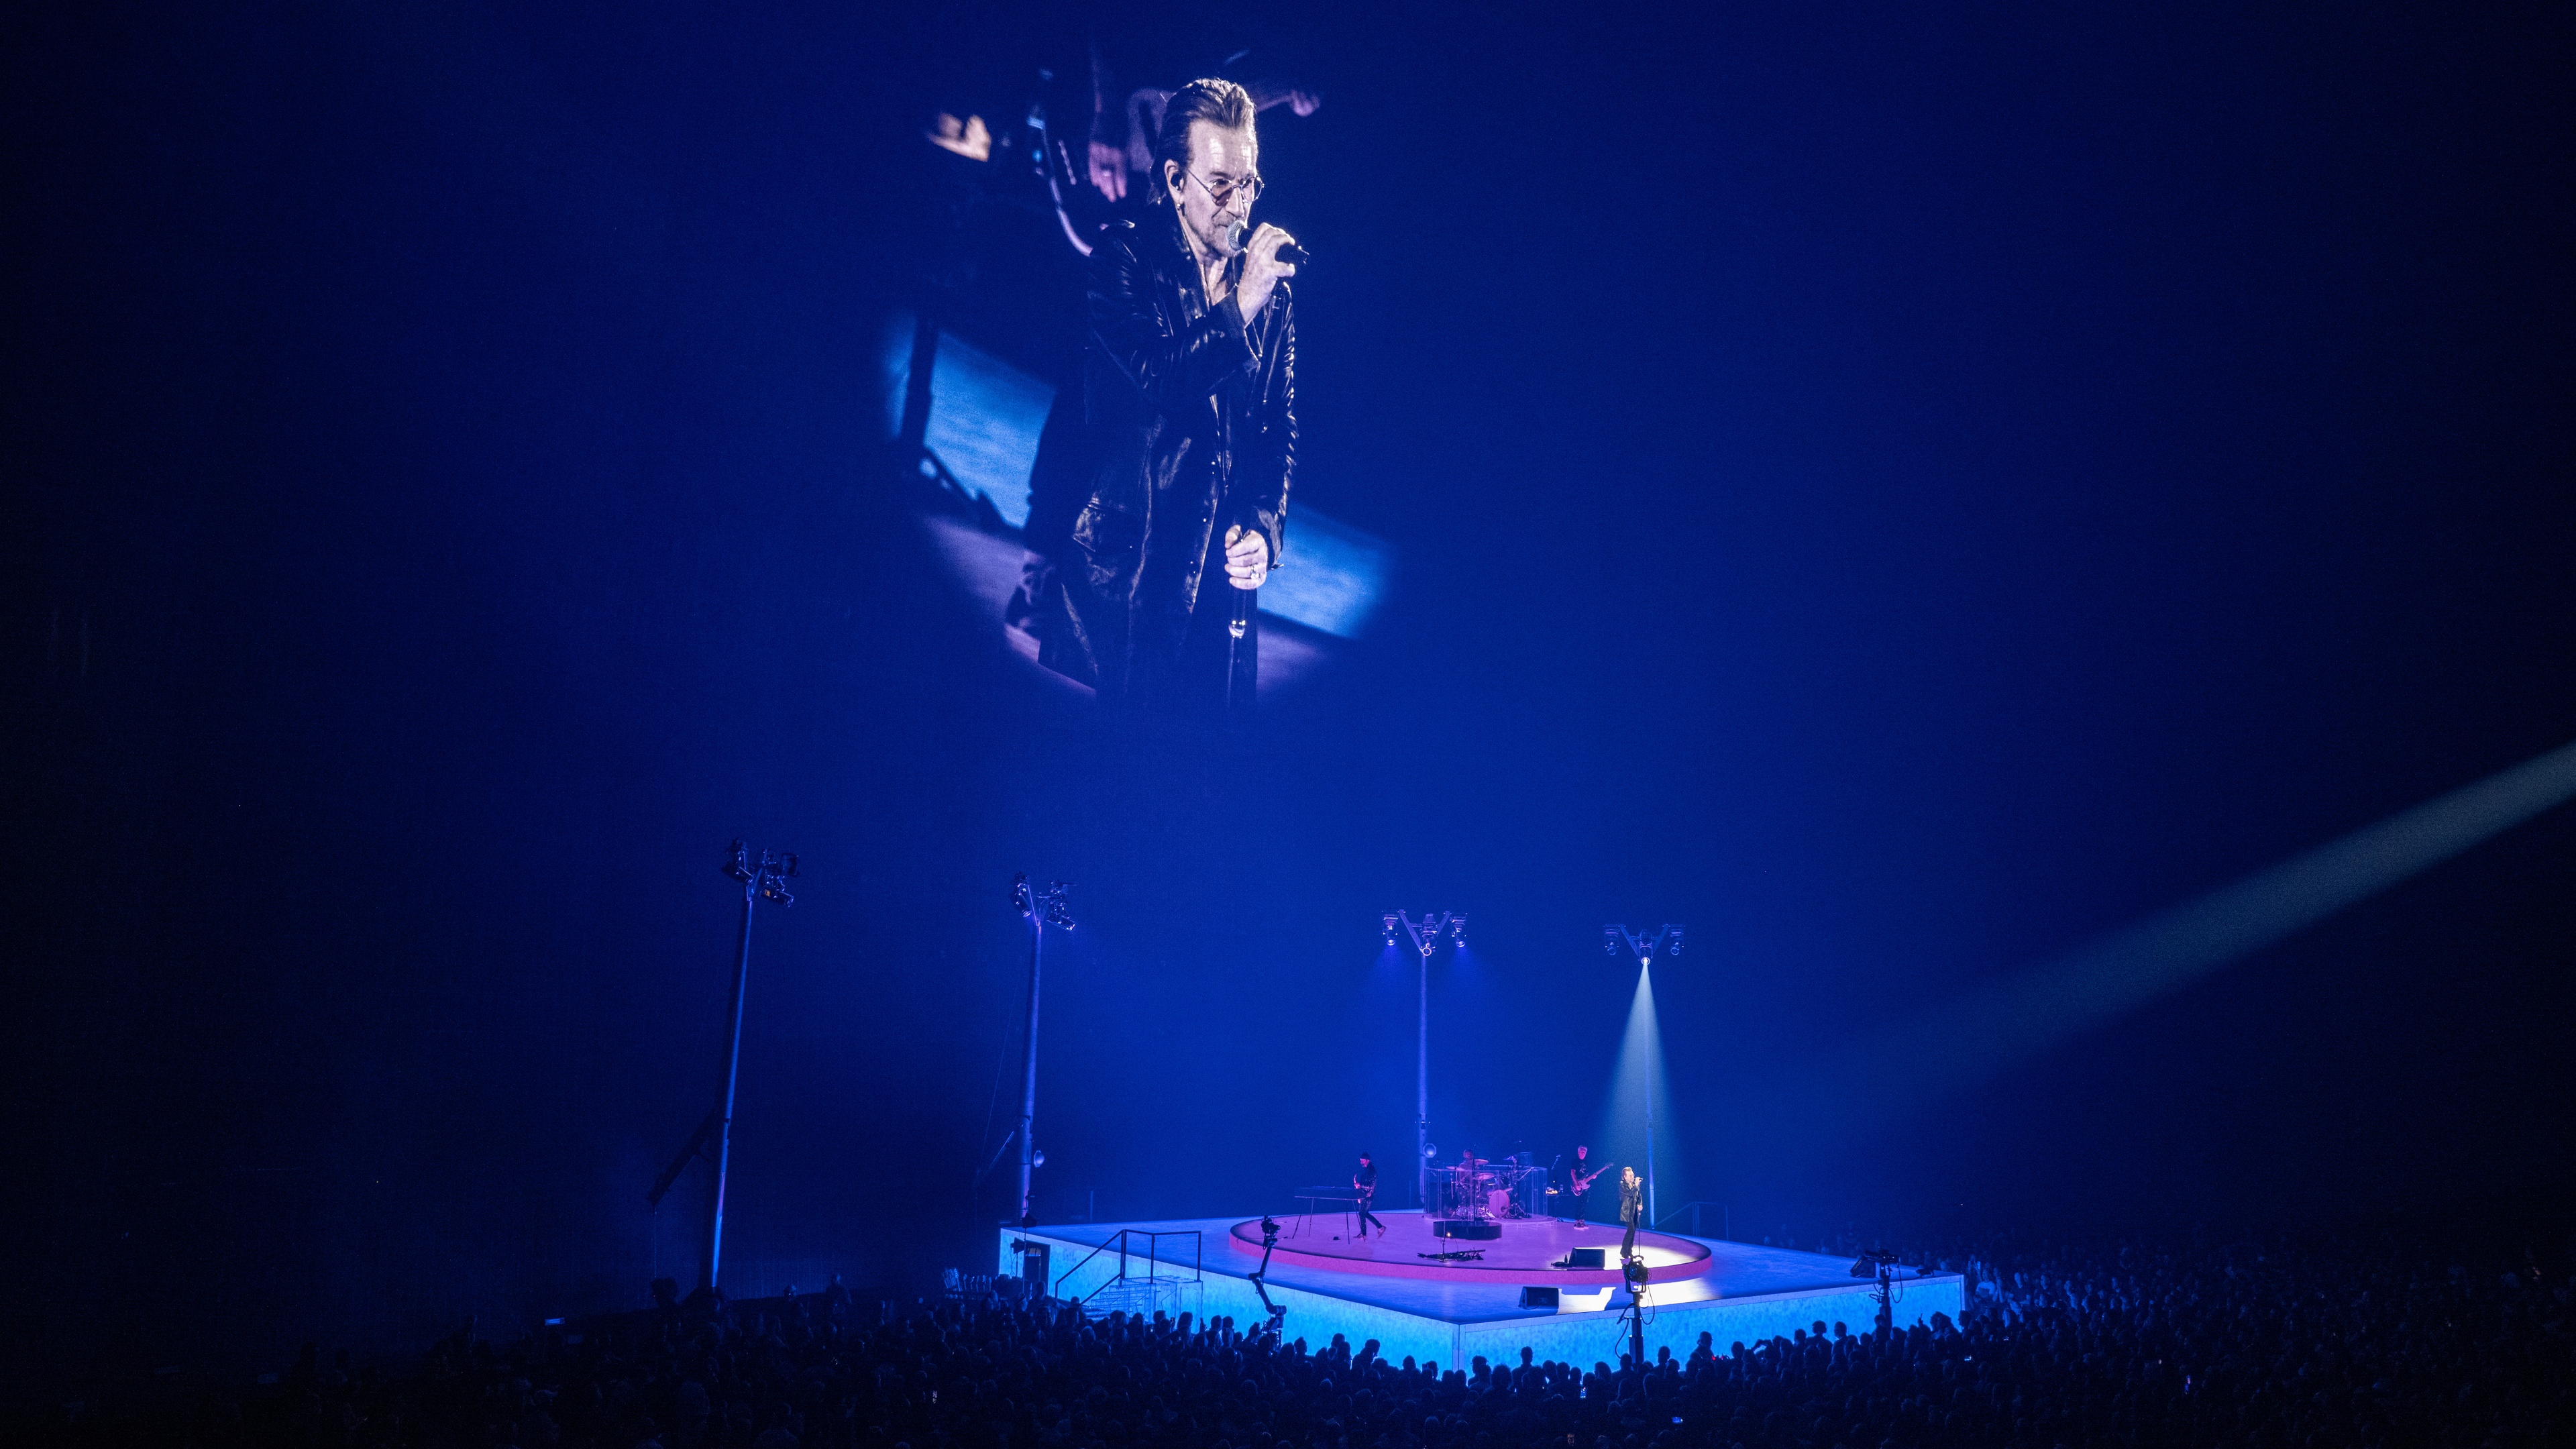 U2 playing on video lit stage in front of video backdrop focusing on lead singer bono at The Sphere in Las Vegas